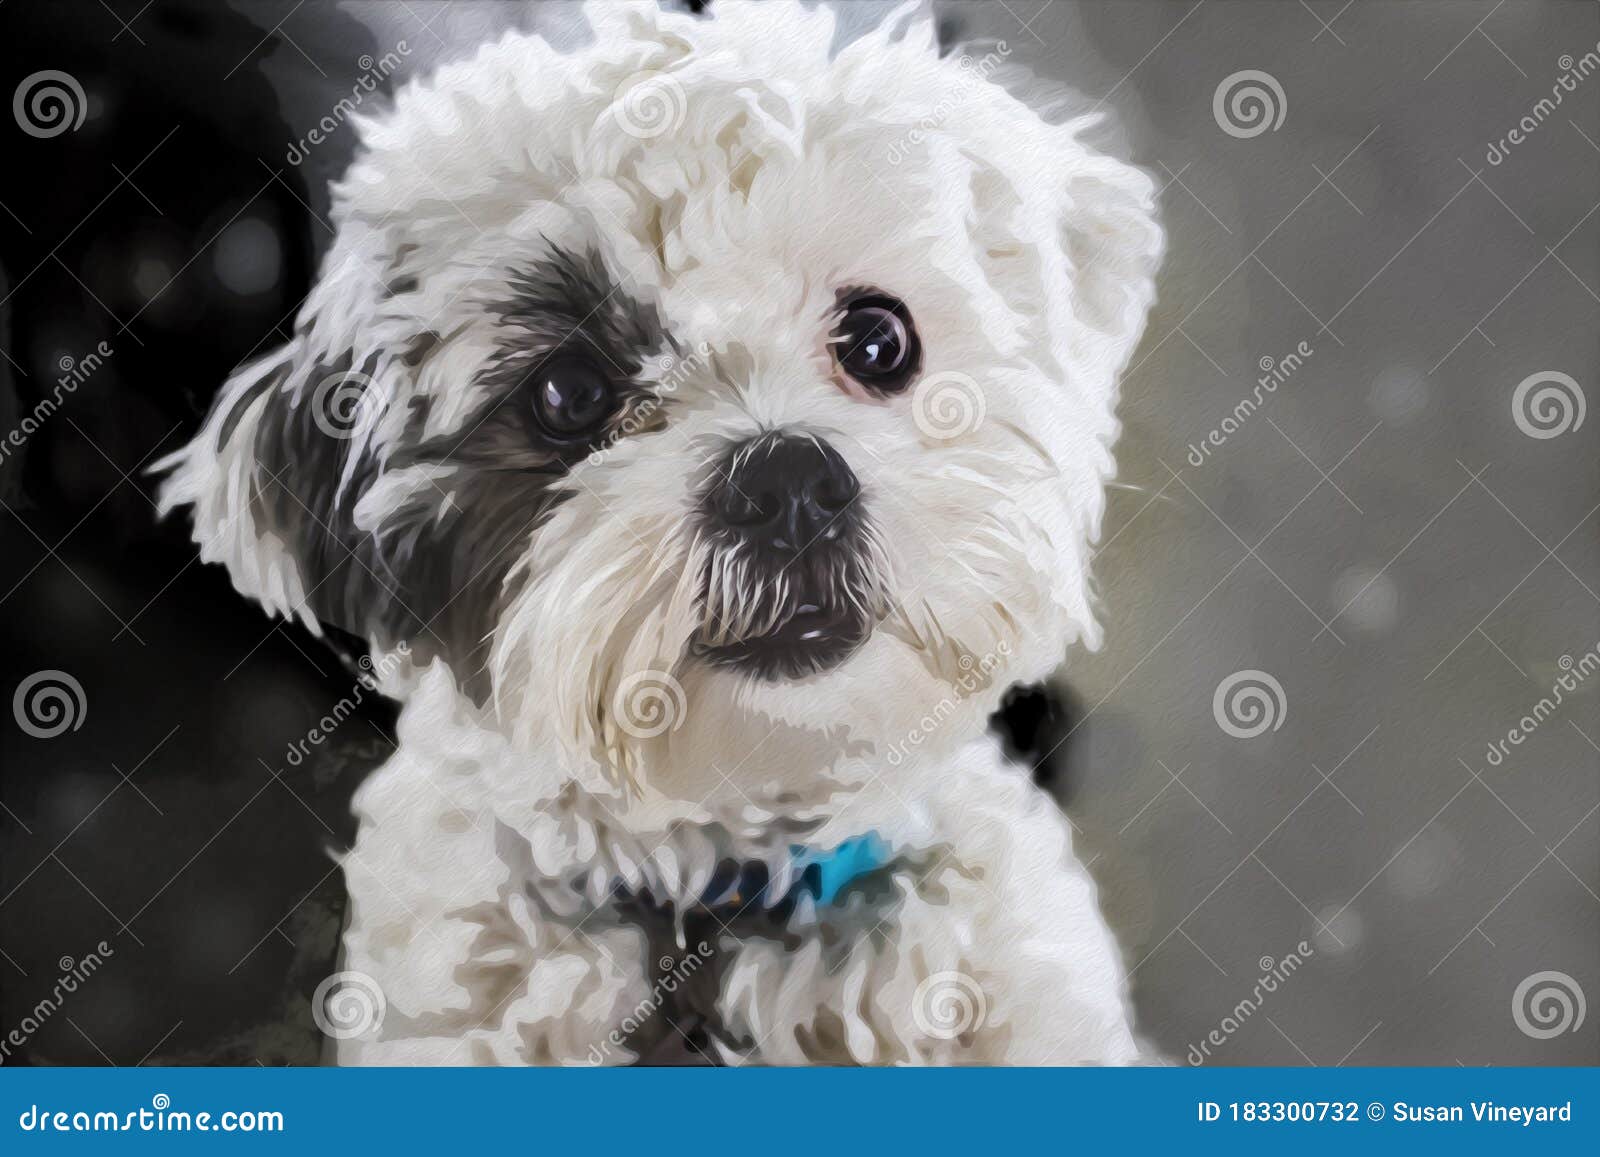 Close-up of Very Cute Fluffy White Dog with Dark Hair Around One Eye  Looking Like he Wants To Be Petted Stock Photo - Image of curious, black:  183300732